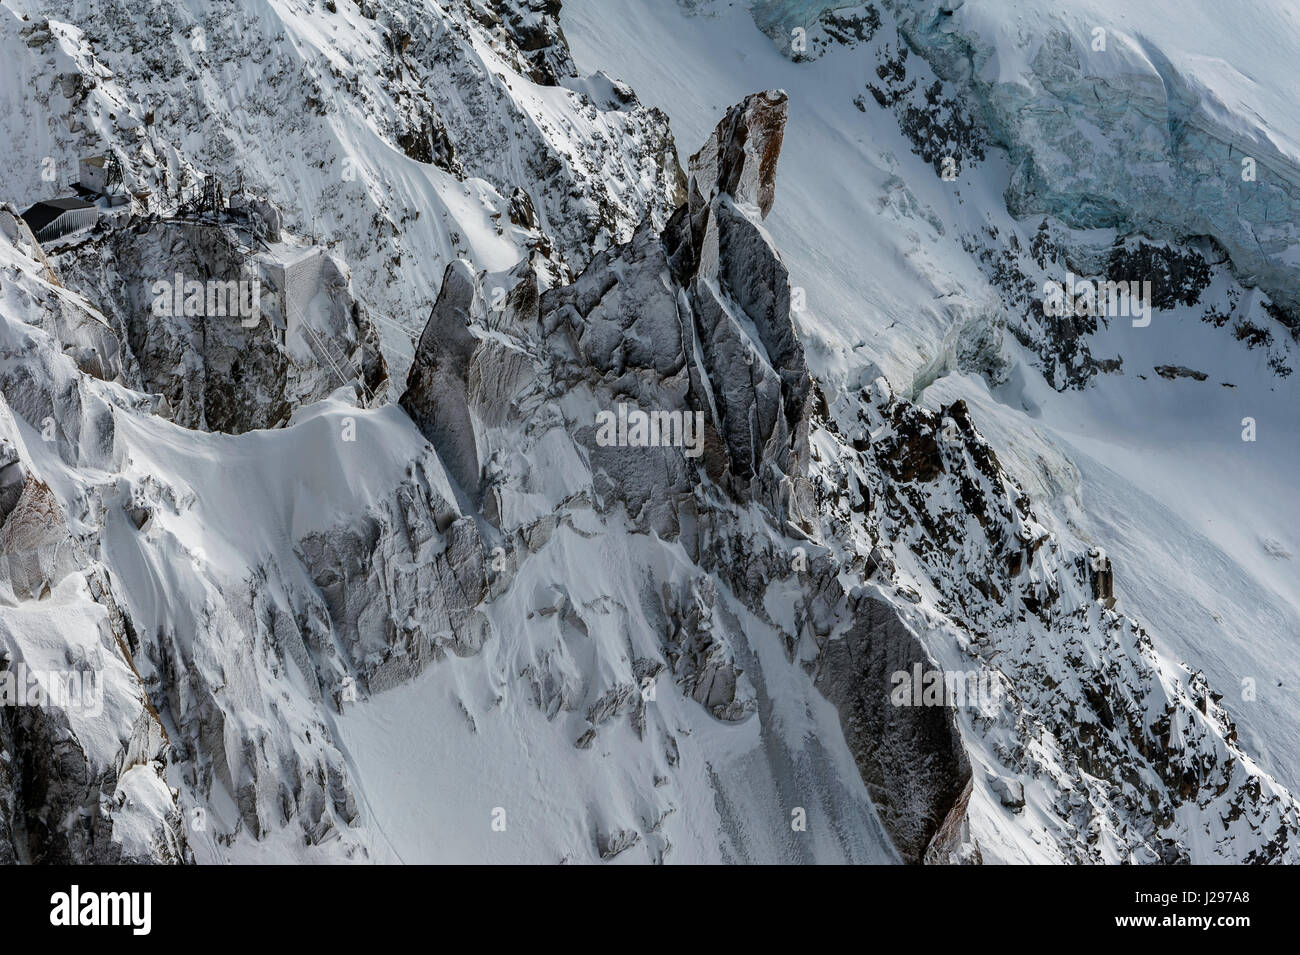 Detail of snow and ice covered cliffs and rockfaces on glacial mountain side off the side of the Mont Blanc in winter Stock Photo